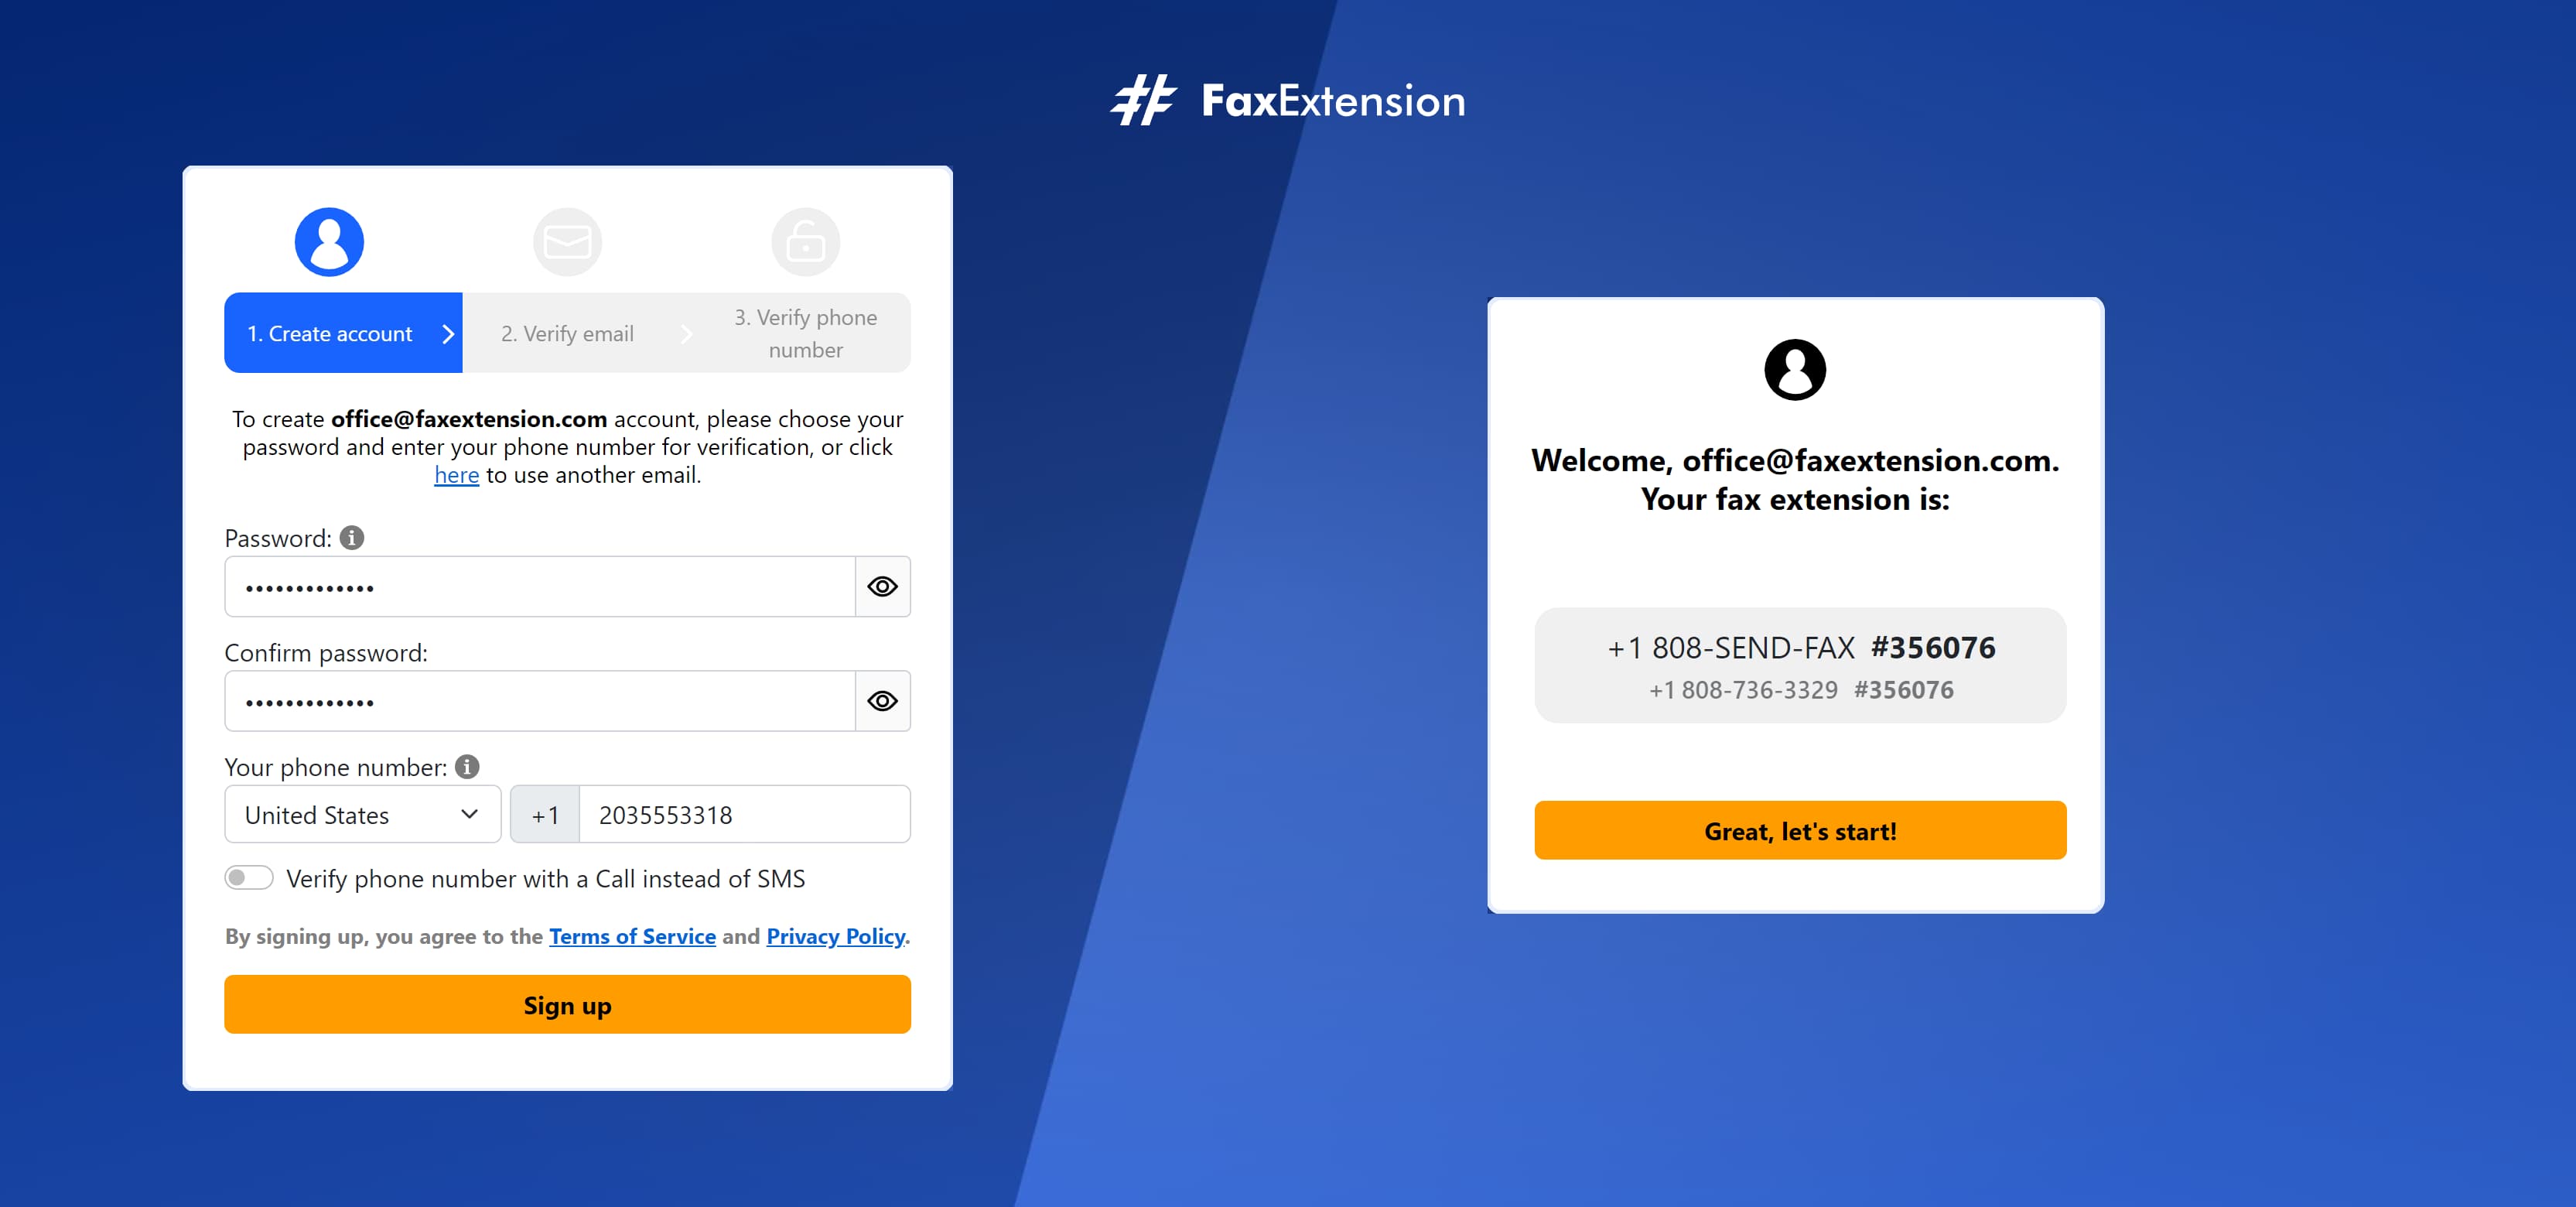 Get your own free online fax extension number instantly